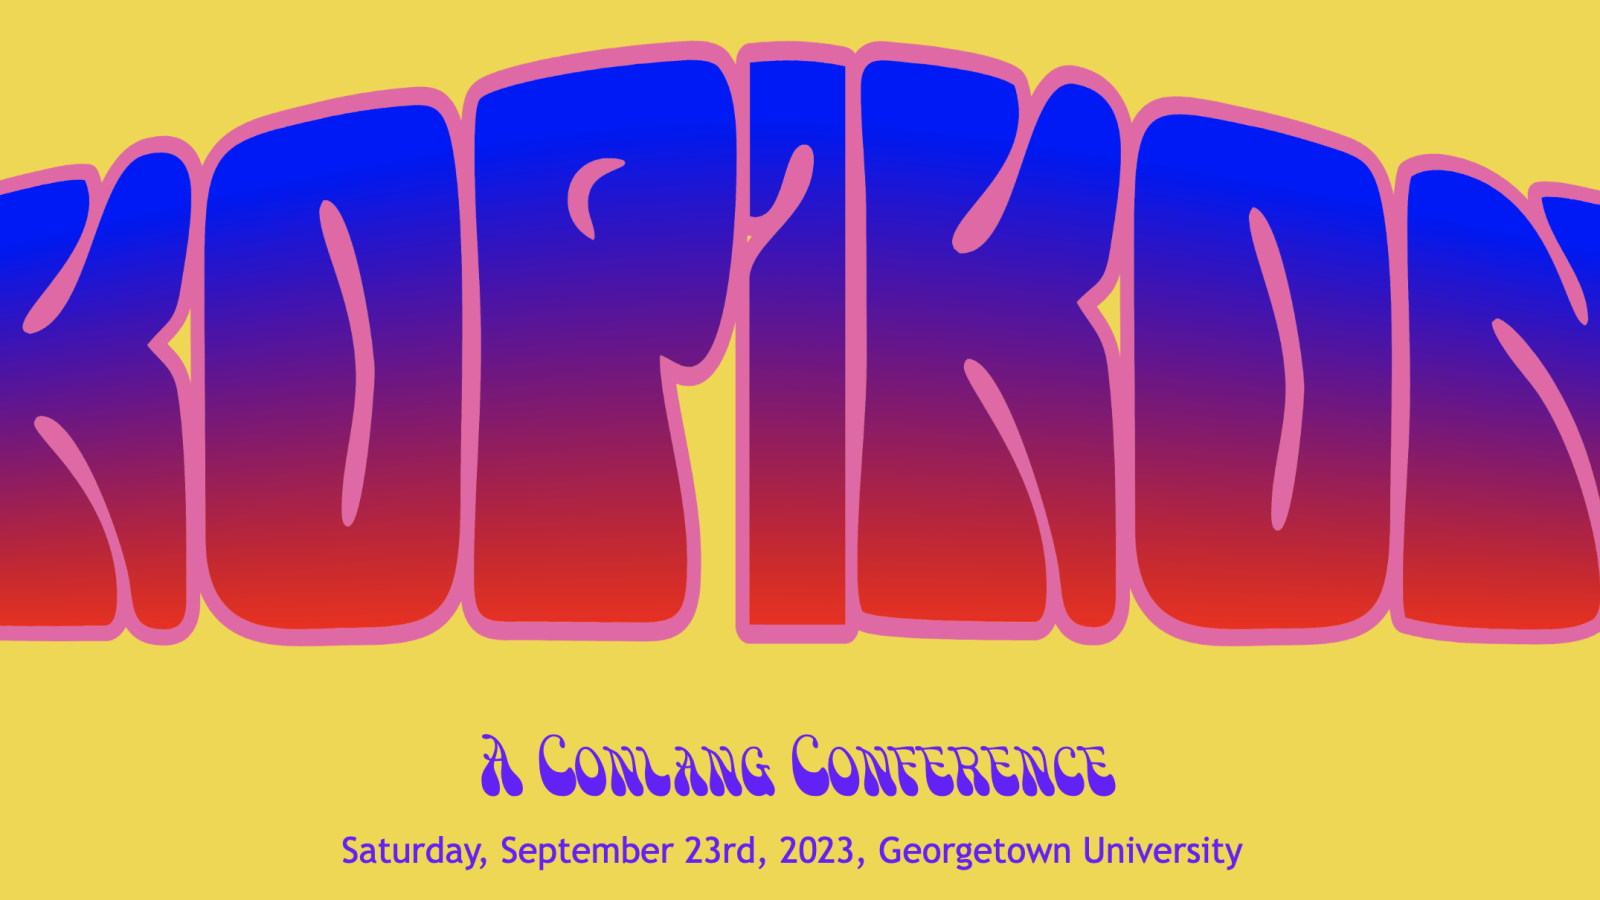 Yellow, red and blue graphic with text, &quot;KopikonL A Conlang Conference, Saturday, September 23, Georgetown Univ.&quot;